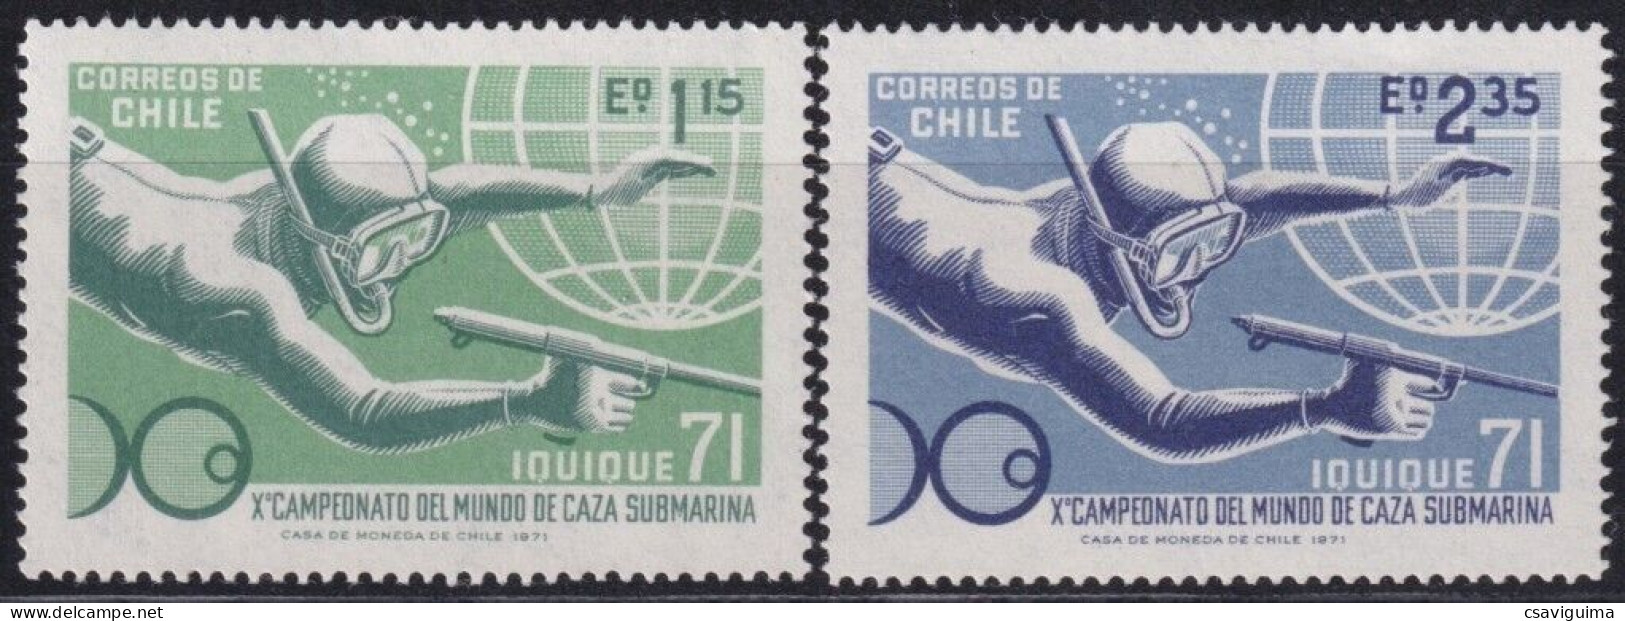 Chile - 1971 - Sport: Diving - Yv 756/57 - Diving